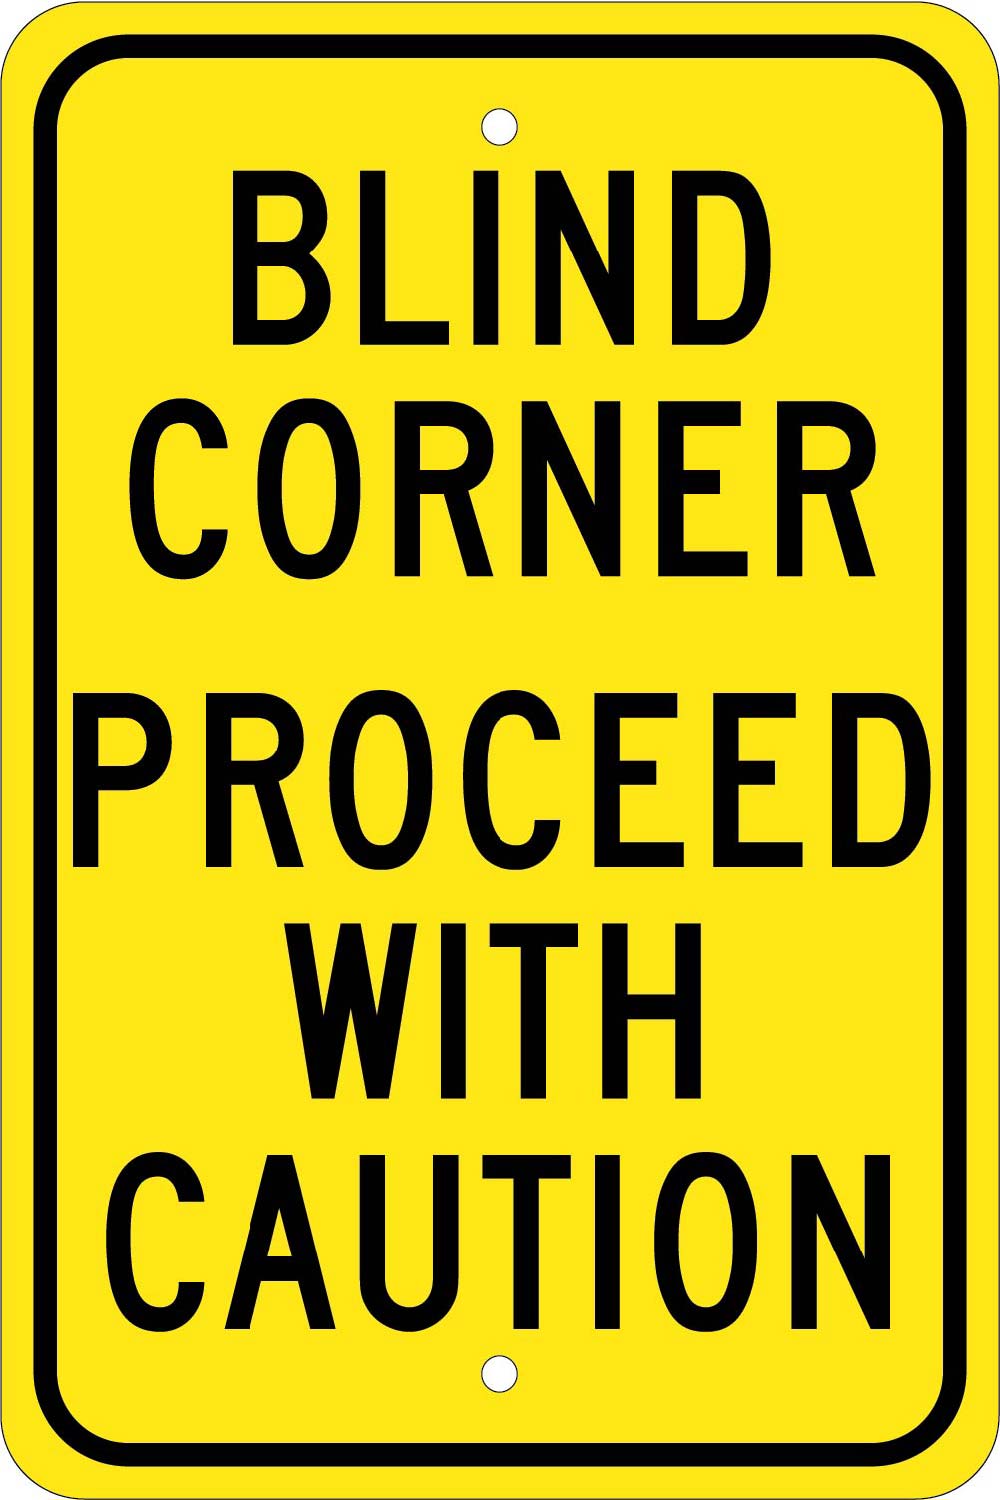 Blind Corner Proceed With Caution Sign-eSafety Supplies, Inc